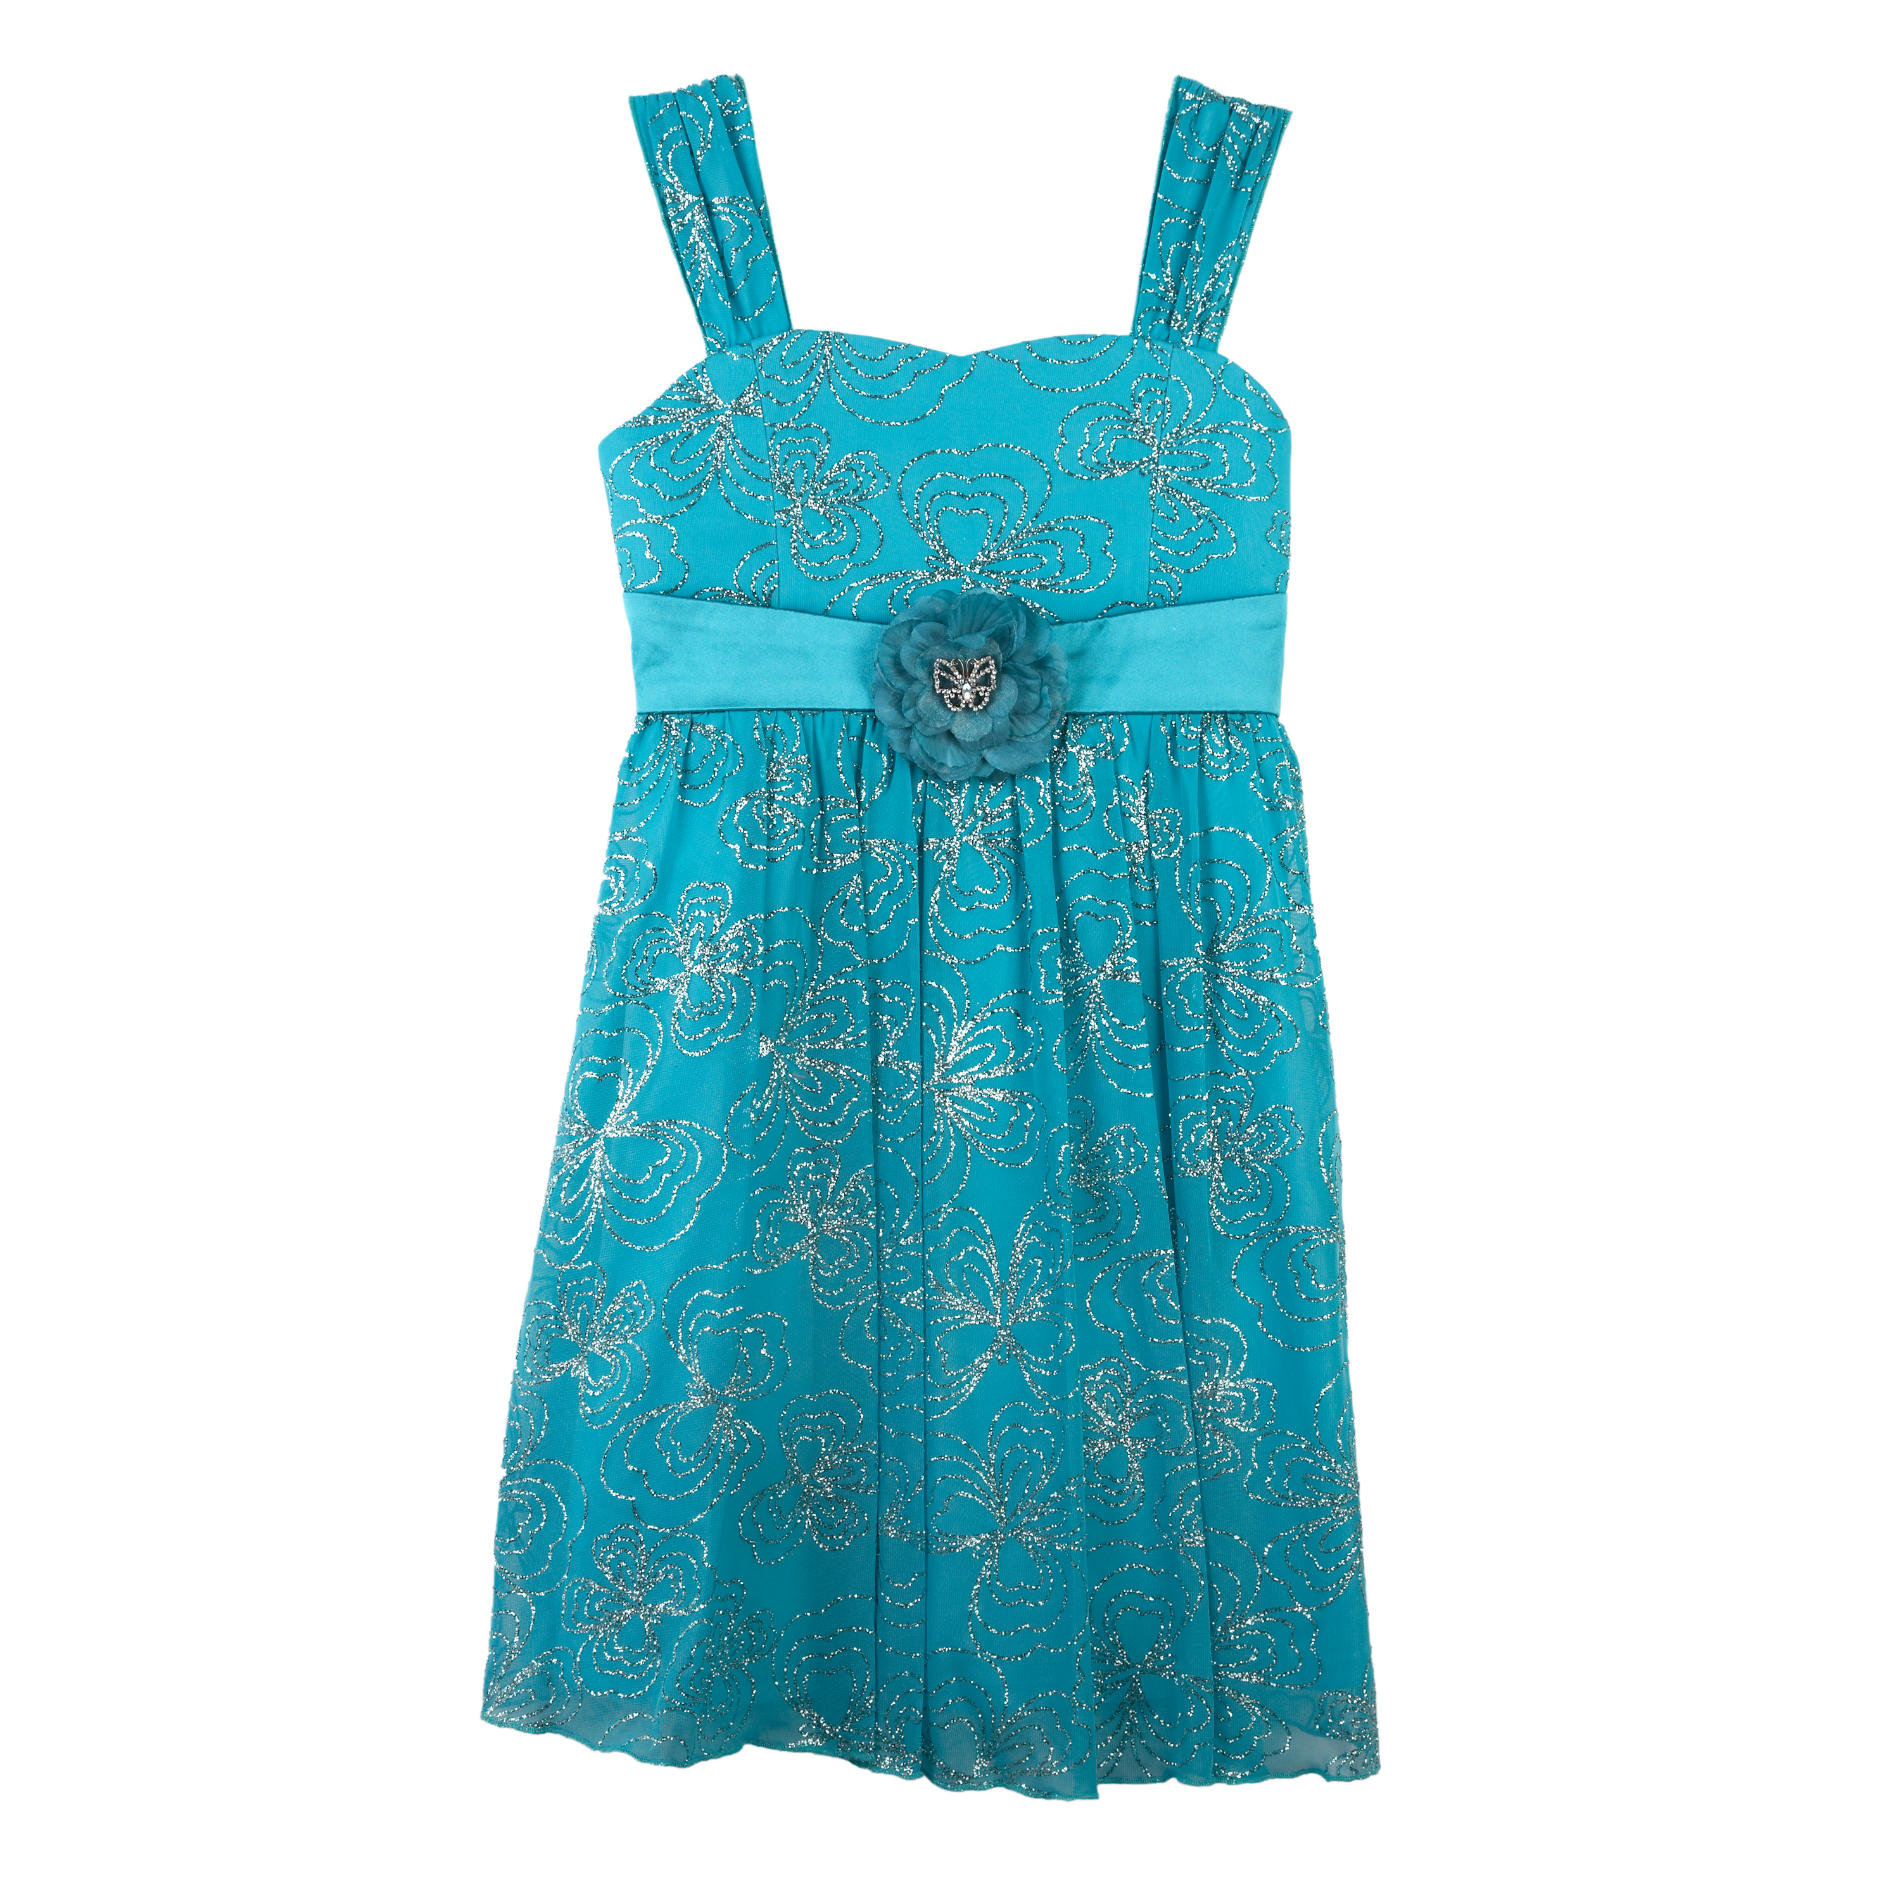 Amy's Closet Girl's Pleated Glitter Party Dress